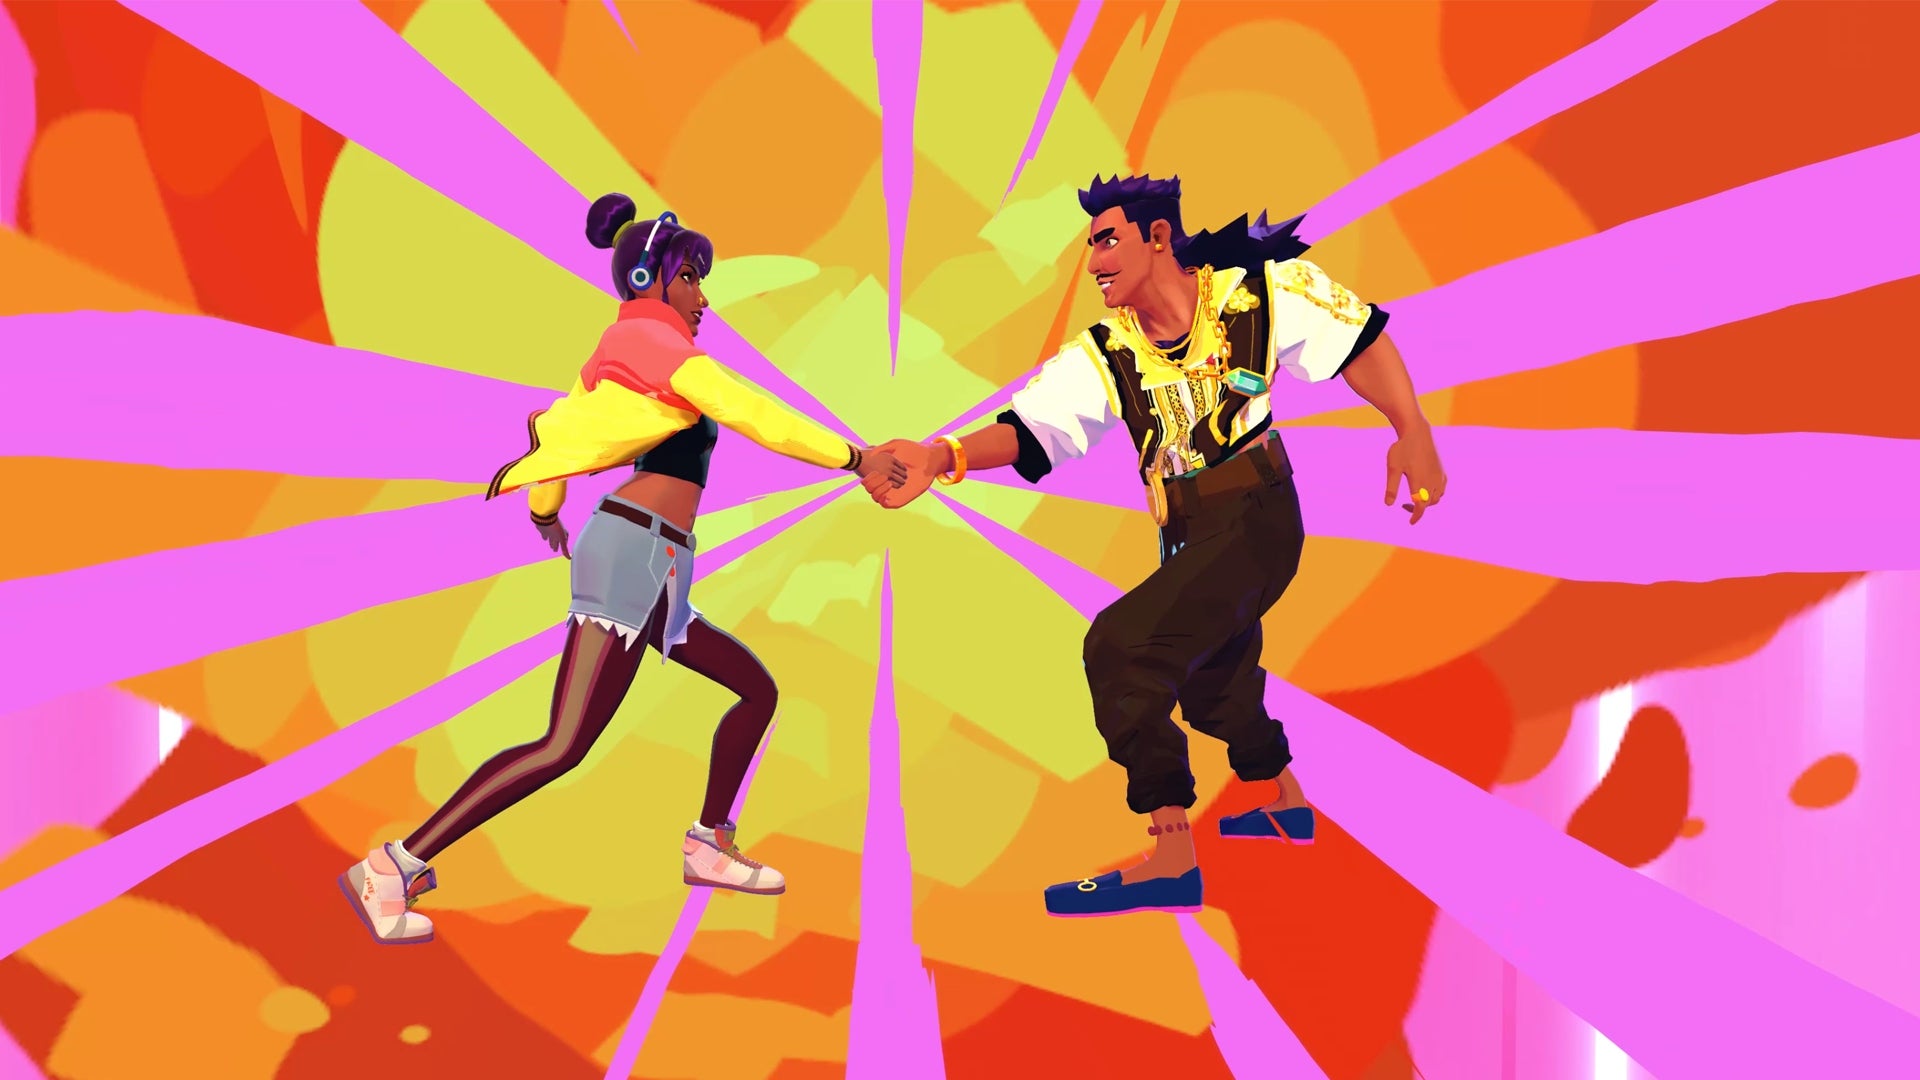 Thirsty Suitors mixes JRPG combat with a dating sim and skateboarding sections.